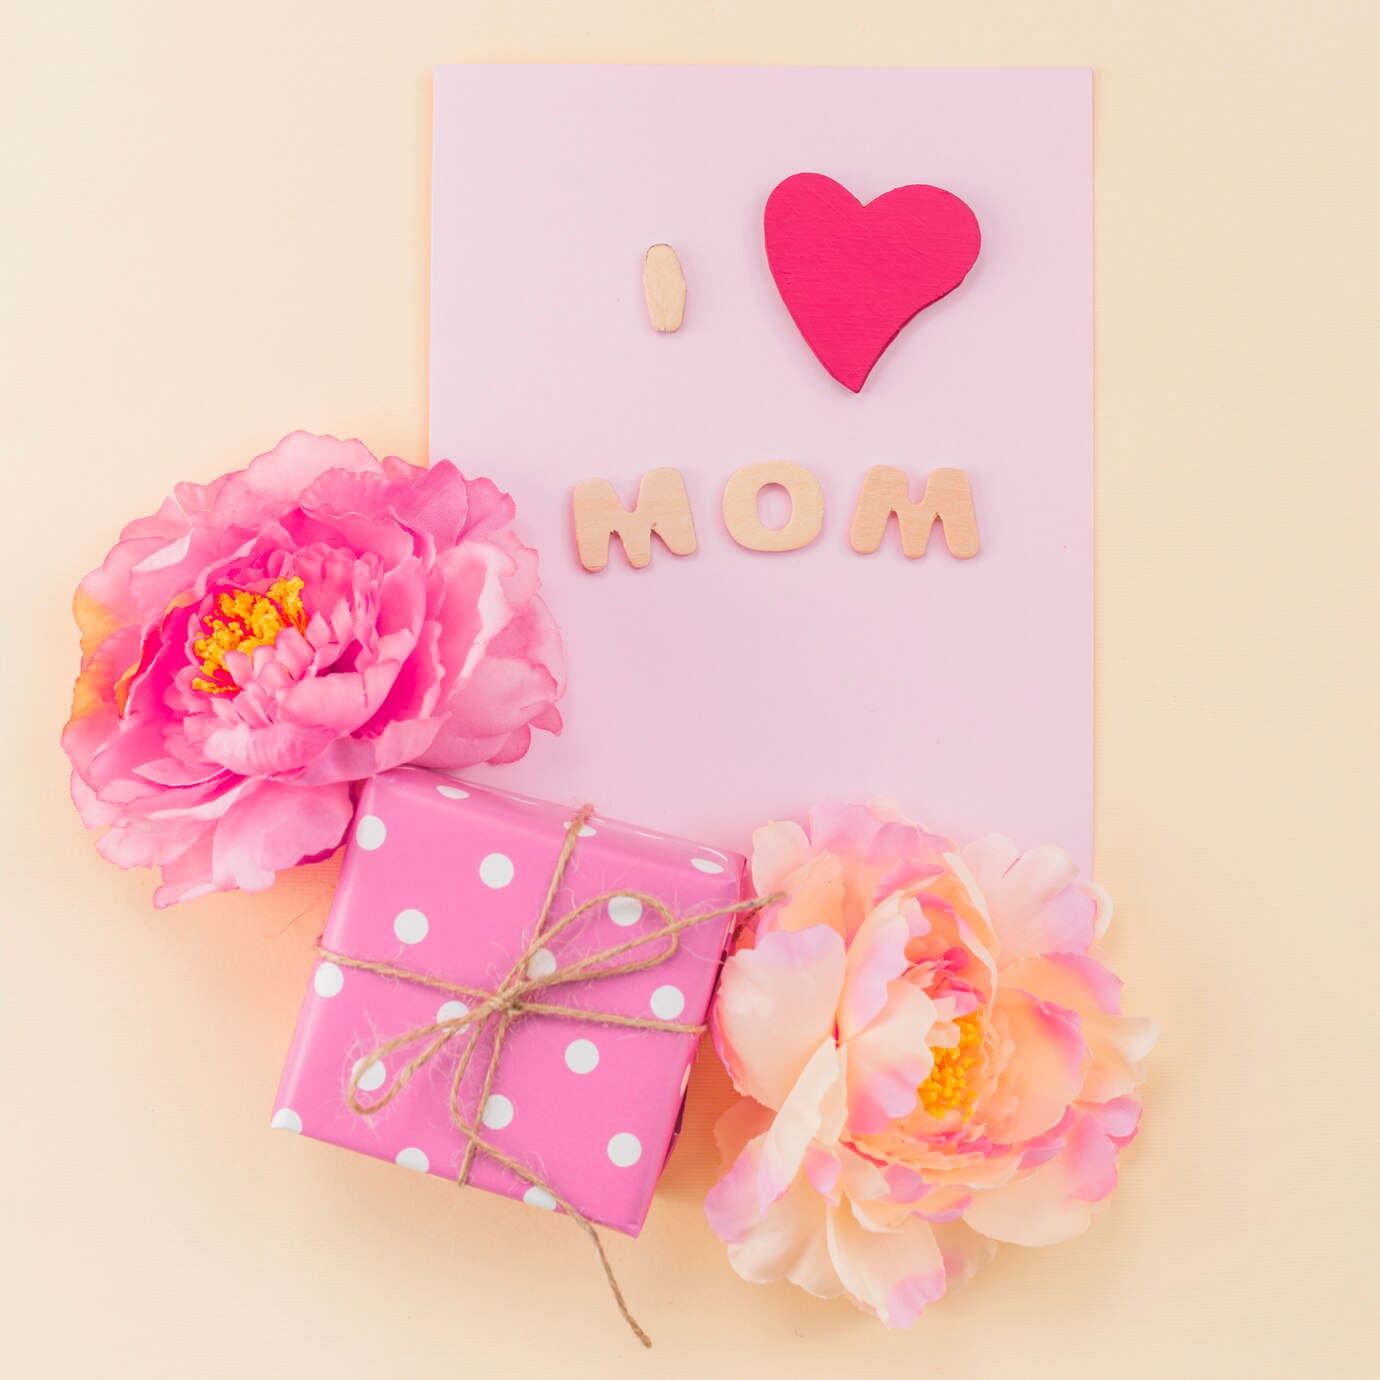 What To Write For Mom On Her 50th Birthday Card?